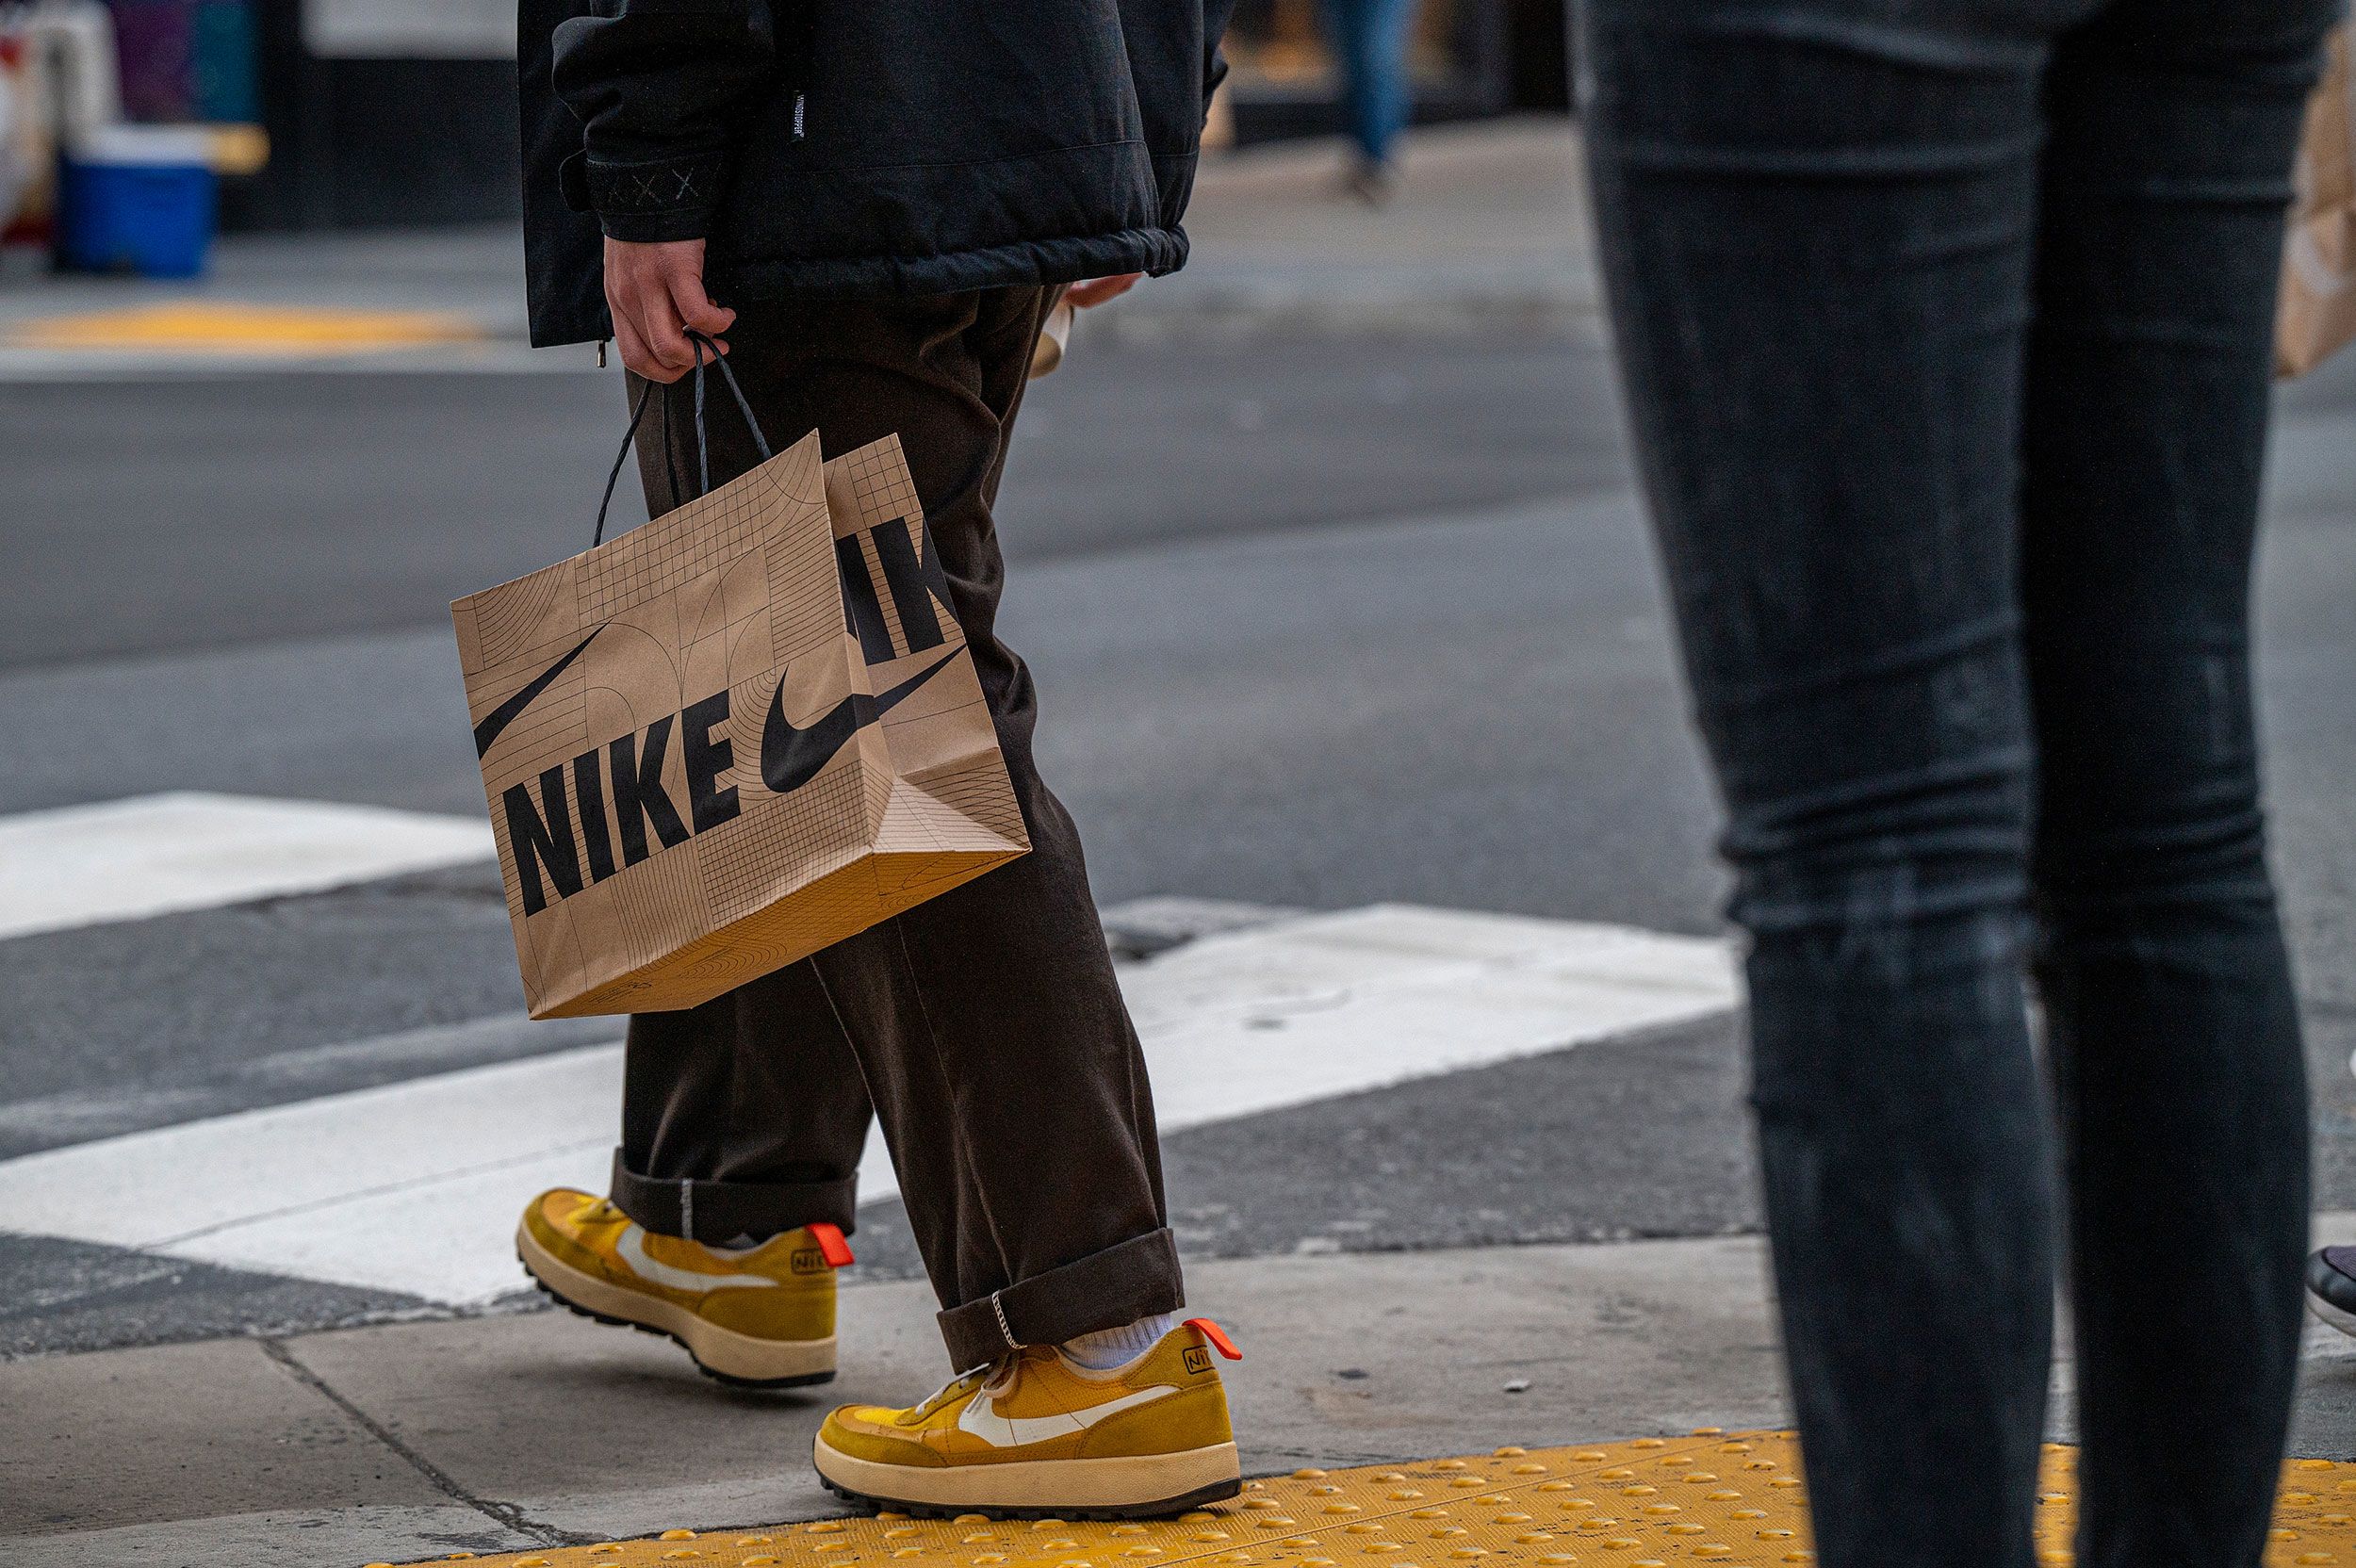 Shoppers are still Nike sneakers | CNN Business